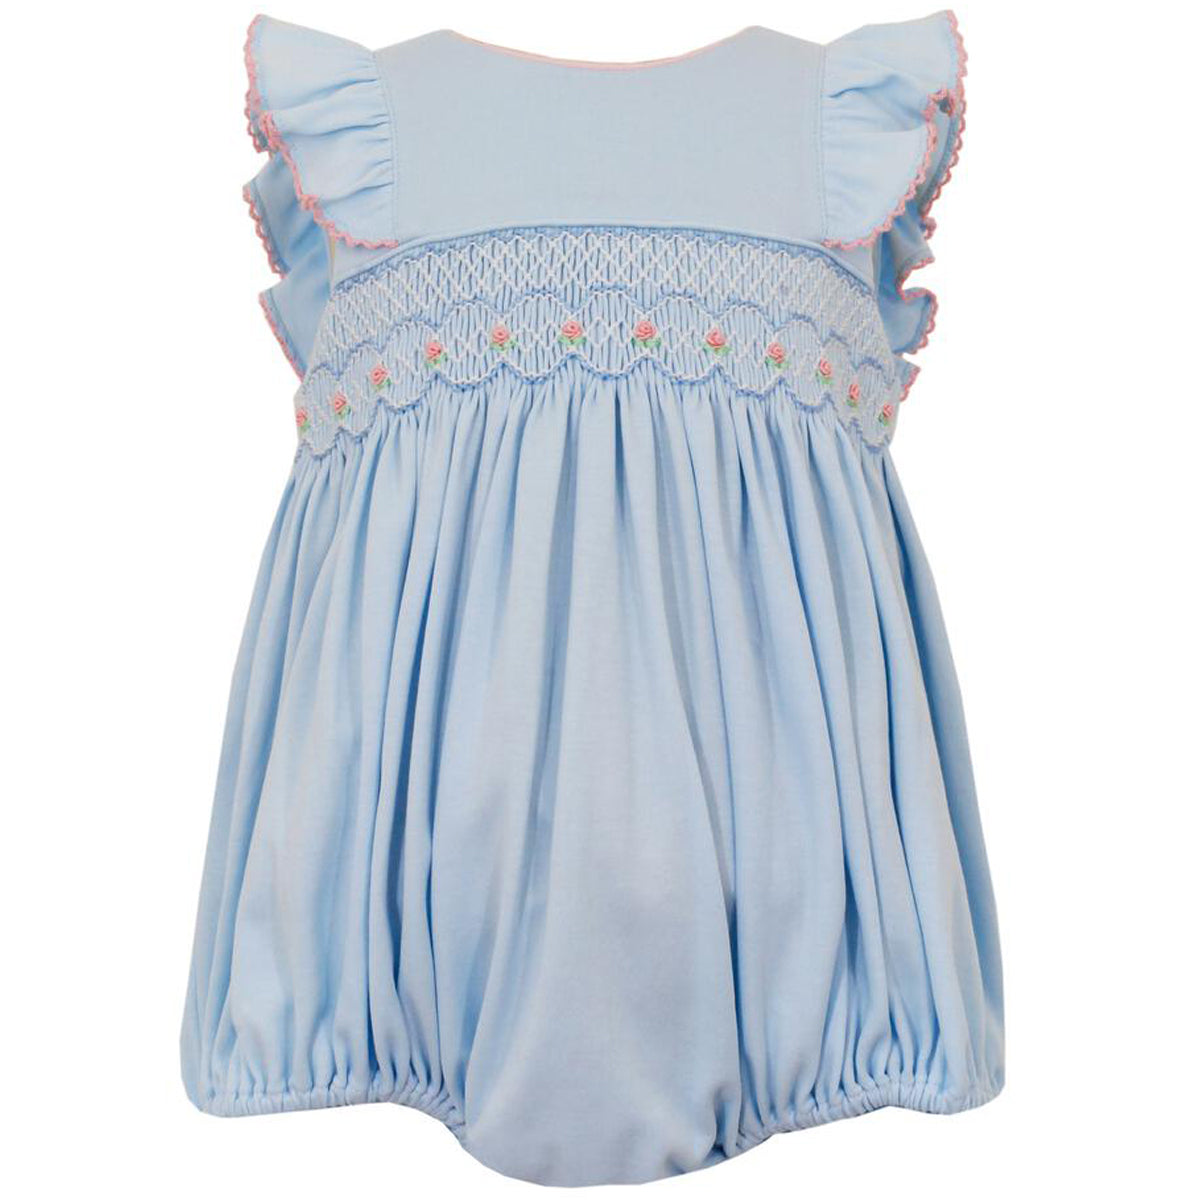 Lucia Light Blue Knit Smocked Bubble W/ Pink Rosettes